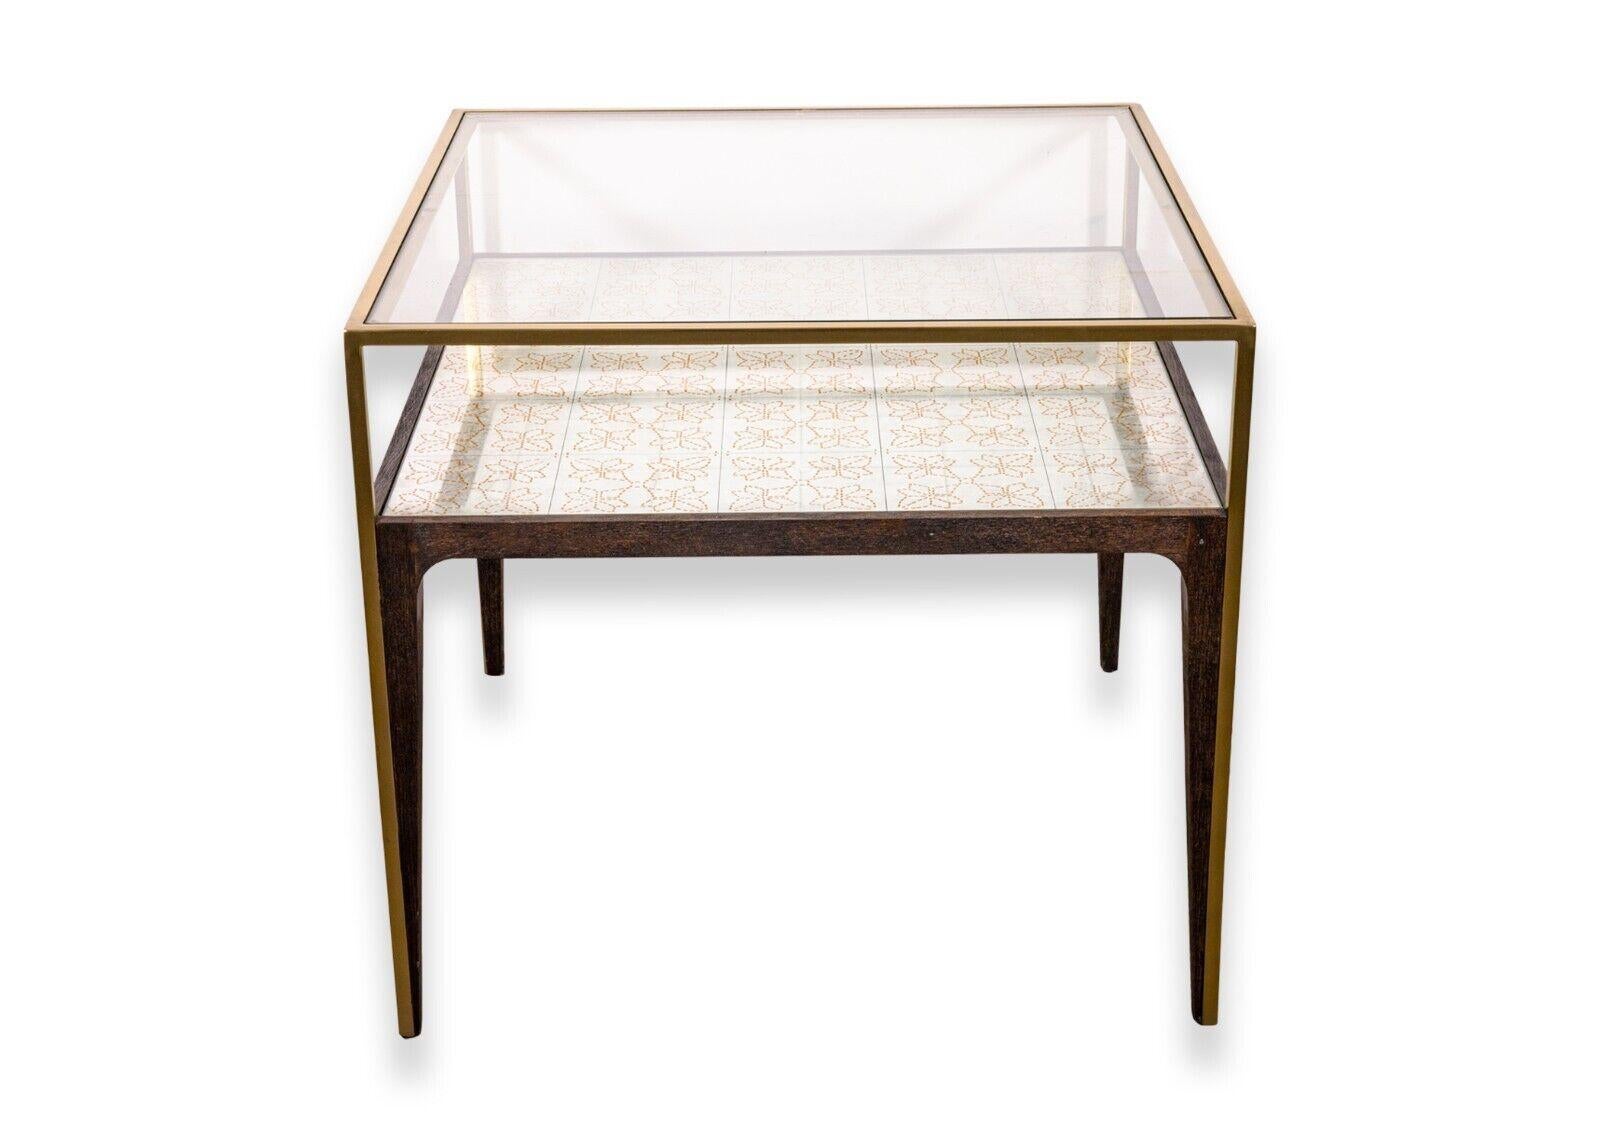 A pair of Arhaus square glass, wood, and brass, side end tables. A wonderful set of end tables featuring a lovely orange floral design, a great choice of materials, and a removable glass top. These tables are in very good condition. Each of these